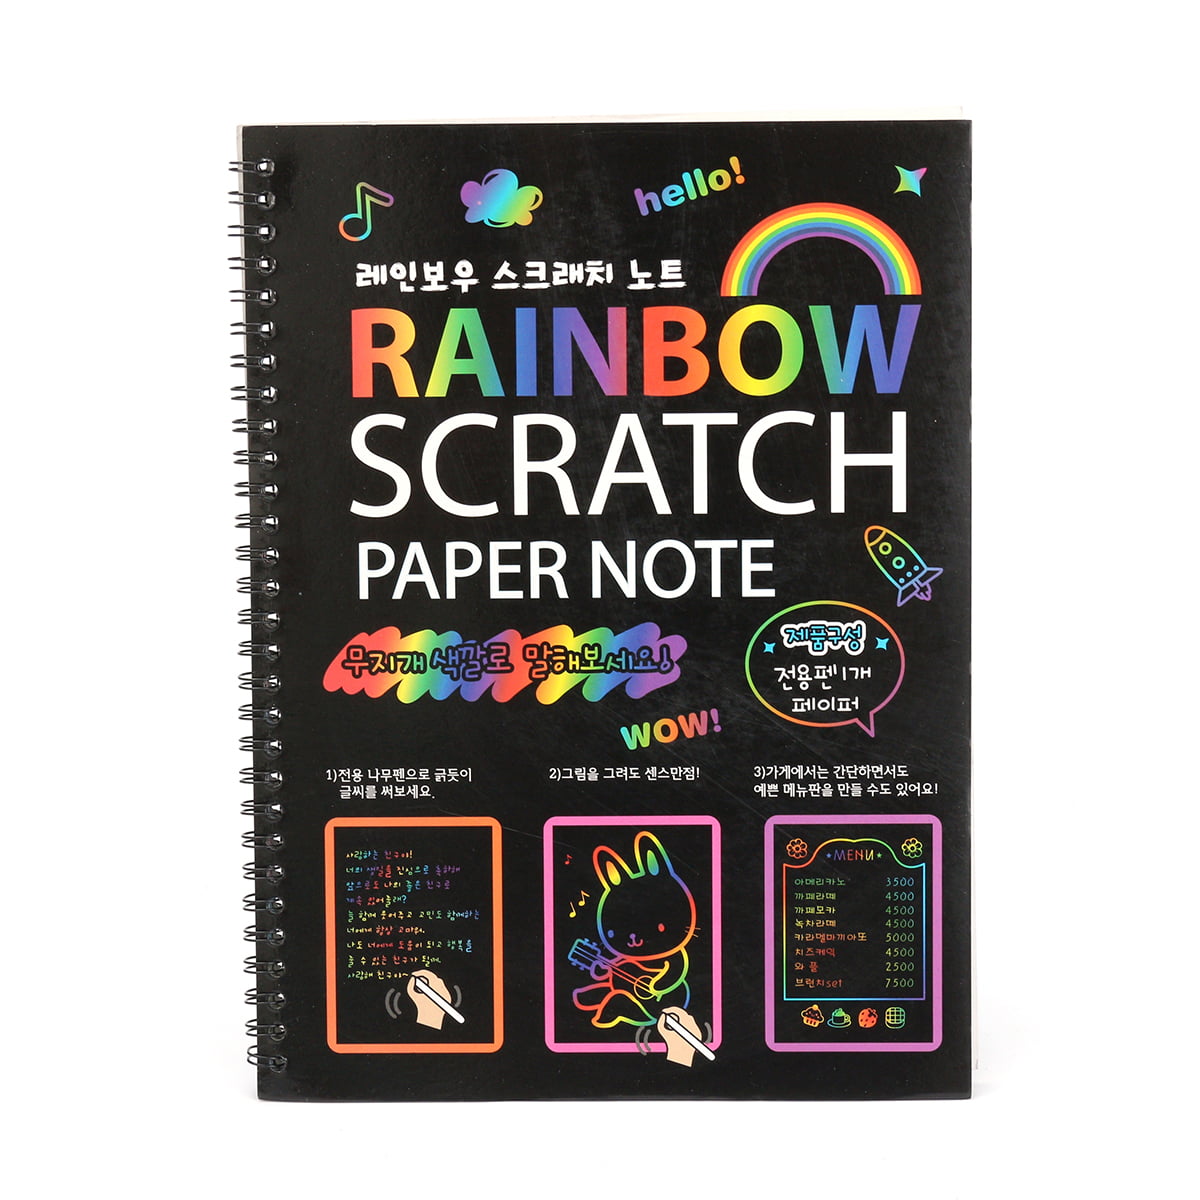 Scratch Art Rainbow Painting Paper Engraving & Craft Set 16 x 11.2 with 9 Tools Venice - Tower Bridge - Singapore - Victoria Harbour - Eiffel Tower Night View Sketch Board for Kids & Adults 